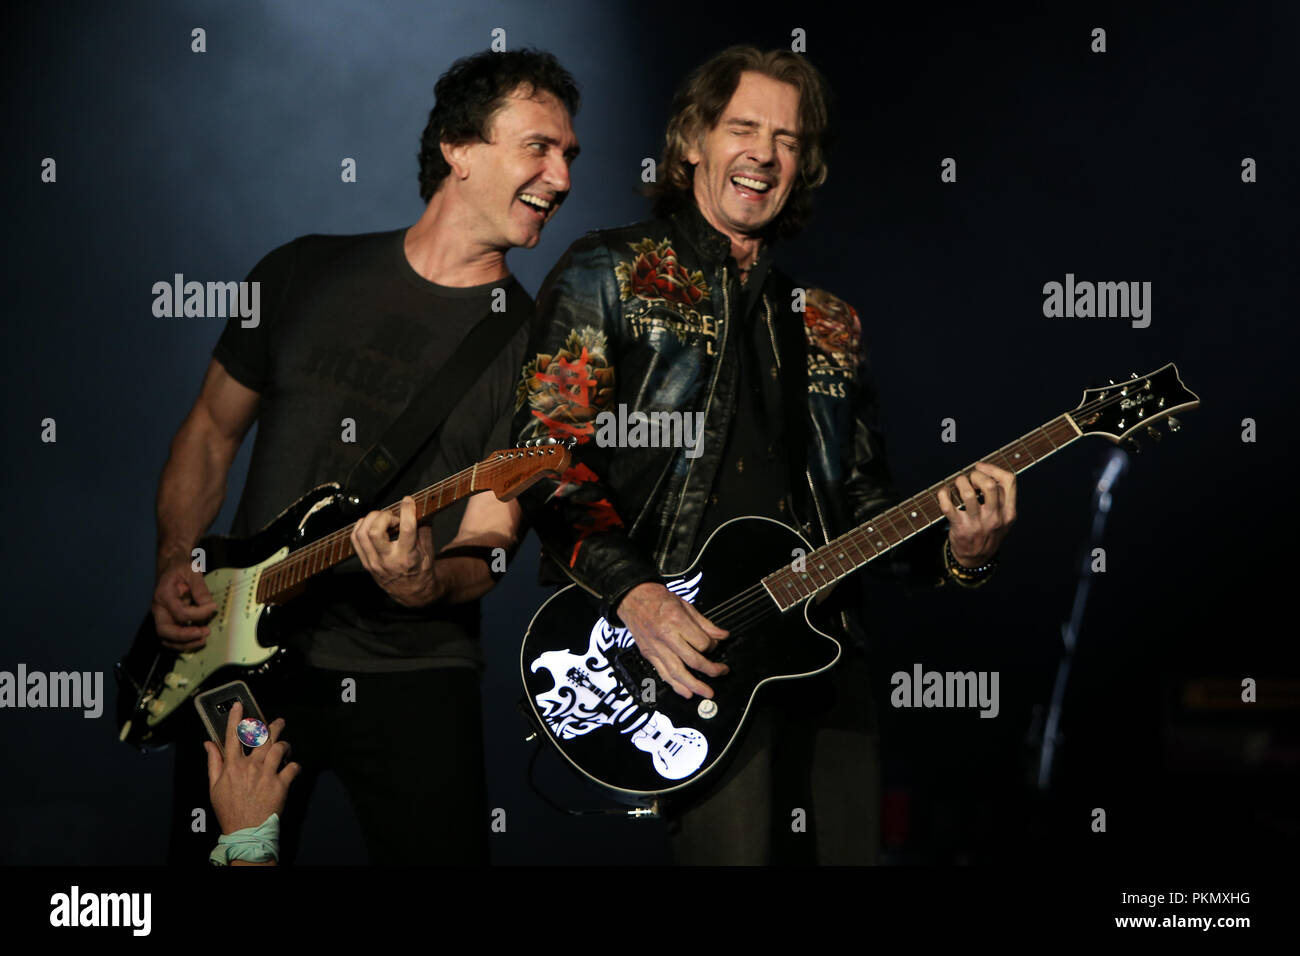 HUNTINGTON, NY - SEPT 13: Singer Rick Springfield performs in concert at the Paramount on September 13, 2018 in Huntington, New York. Credit: AKPhoto/Alamy Live News Stock Photo